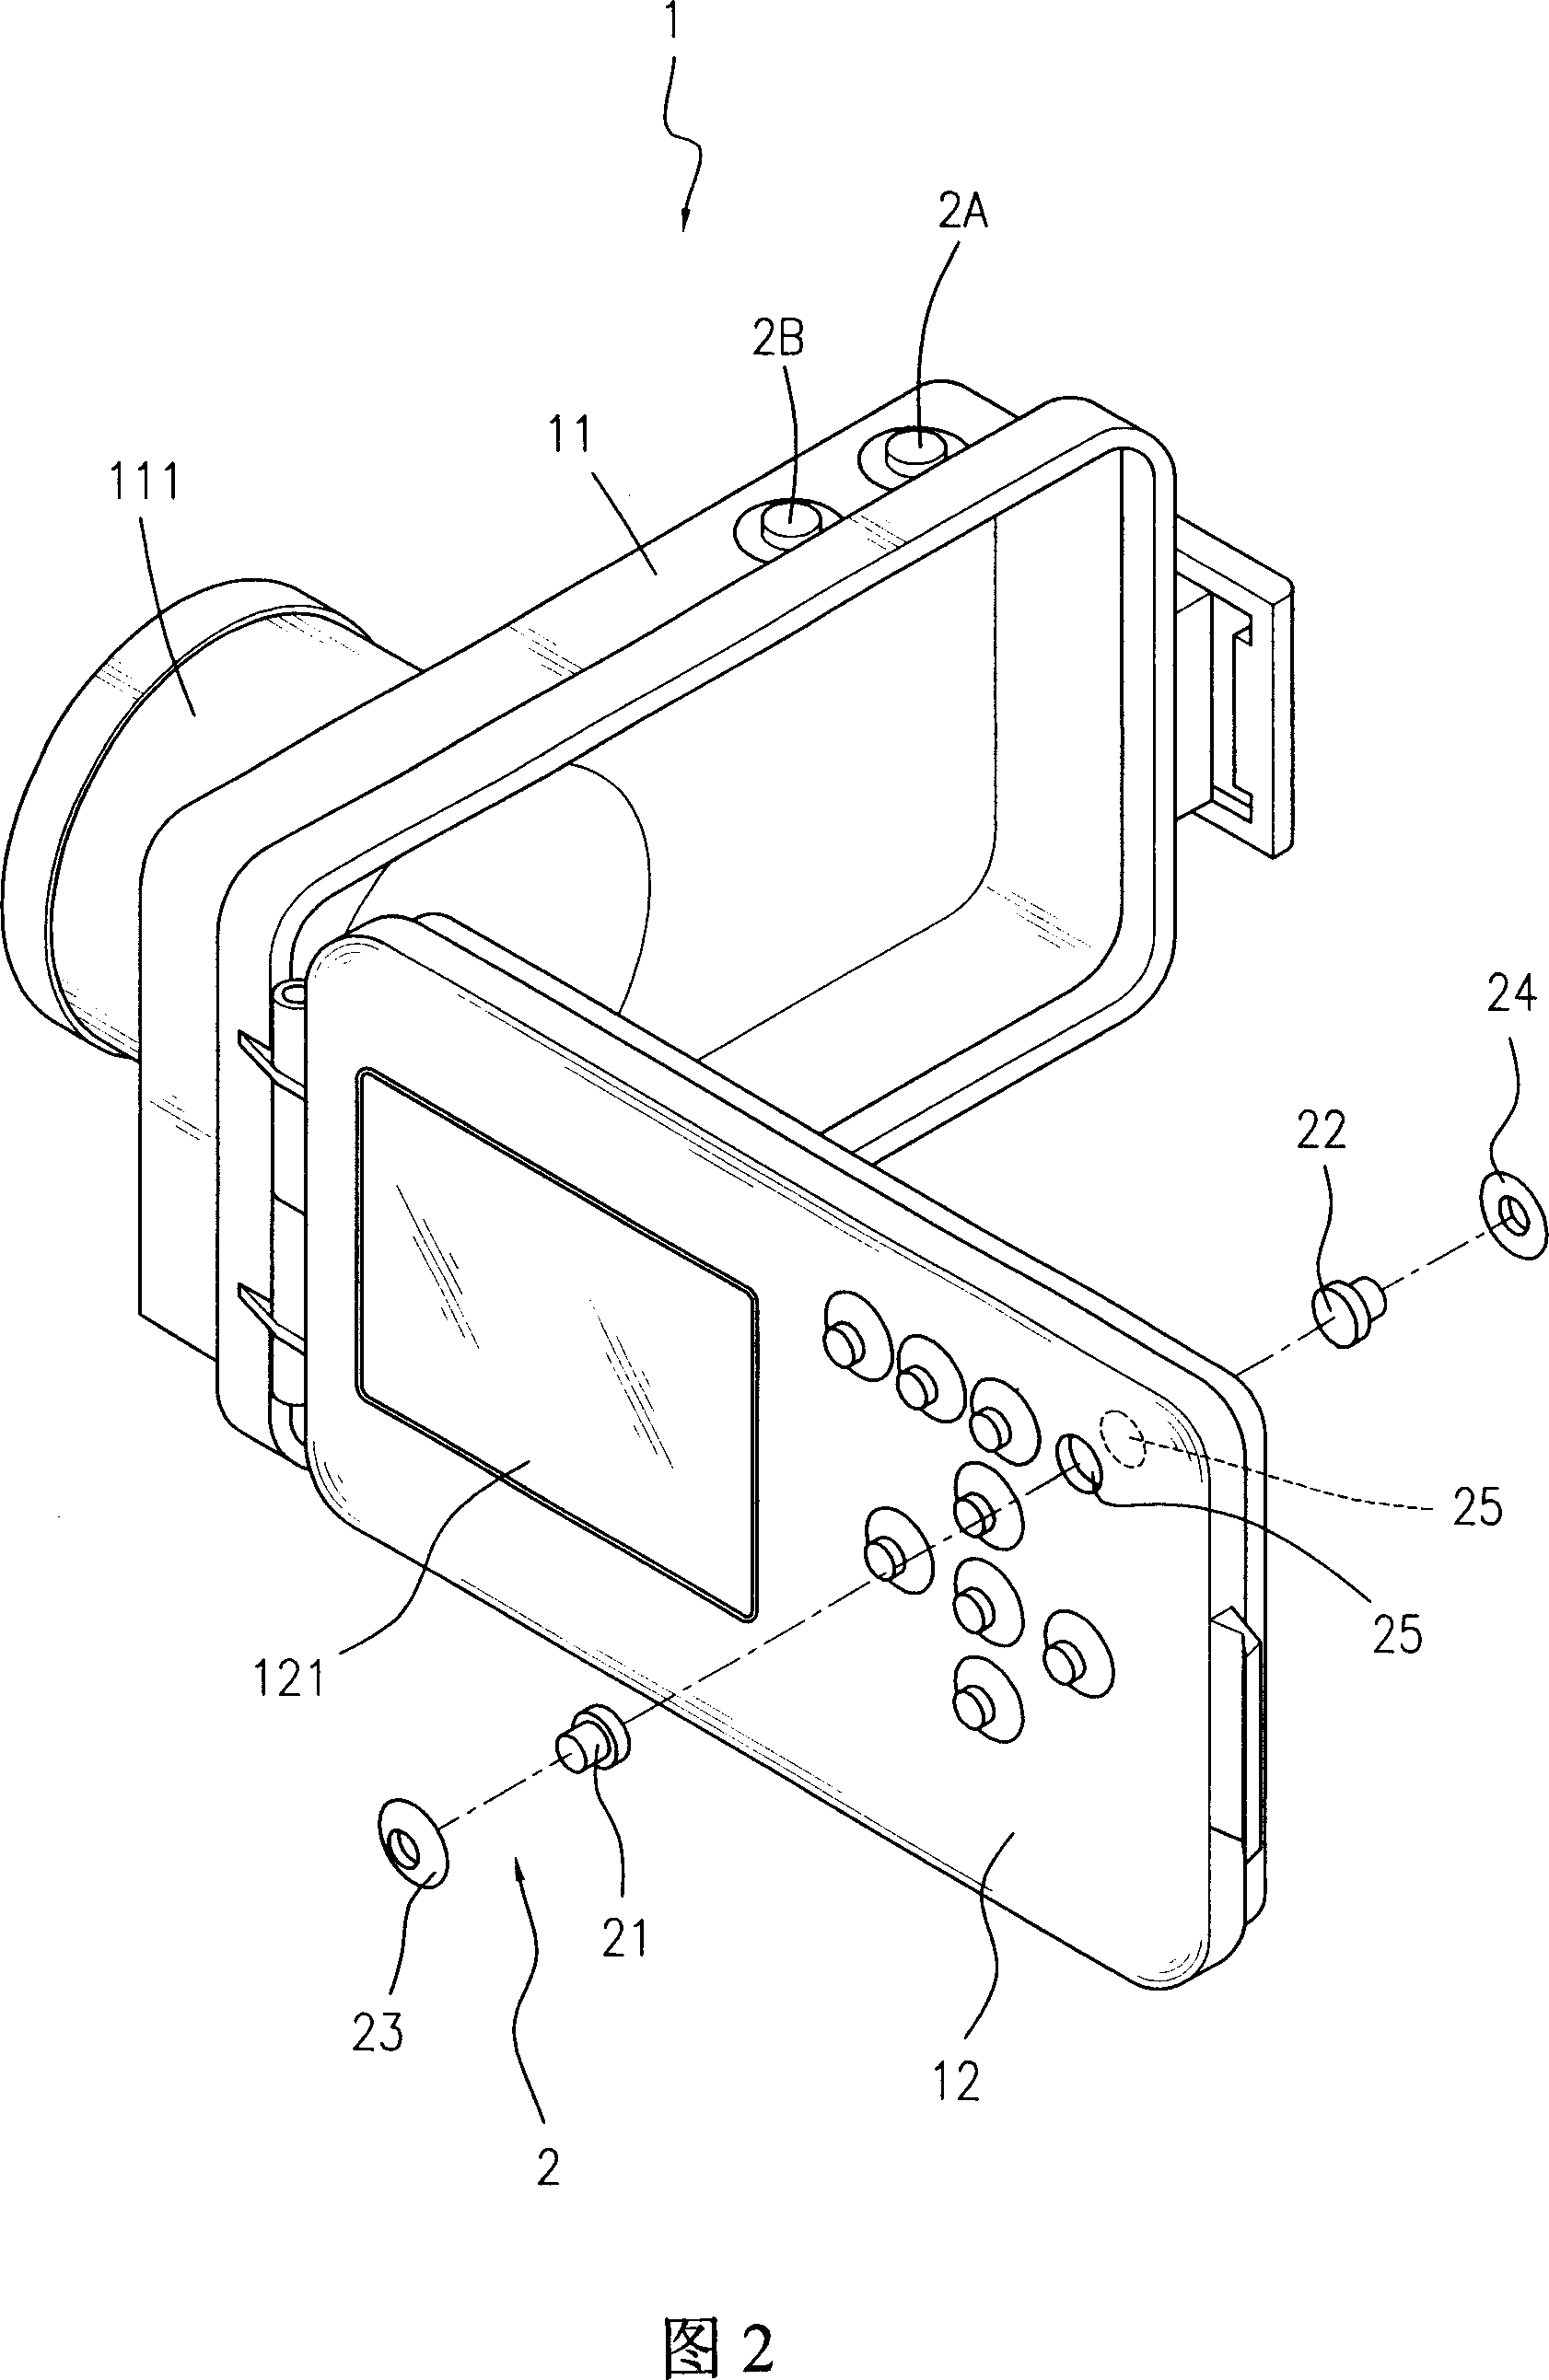 Control device of the water bottom machine with the magnetic key